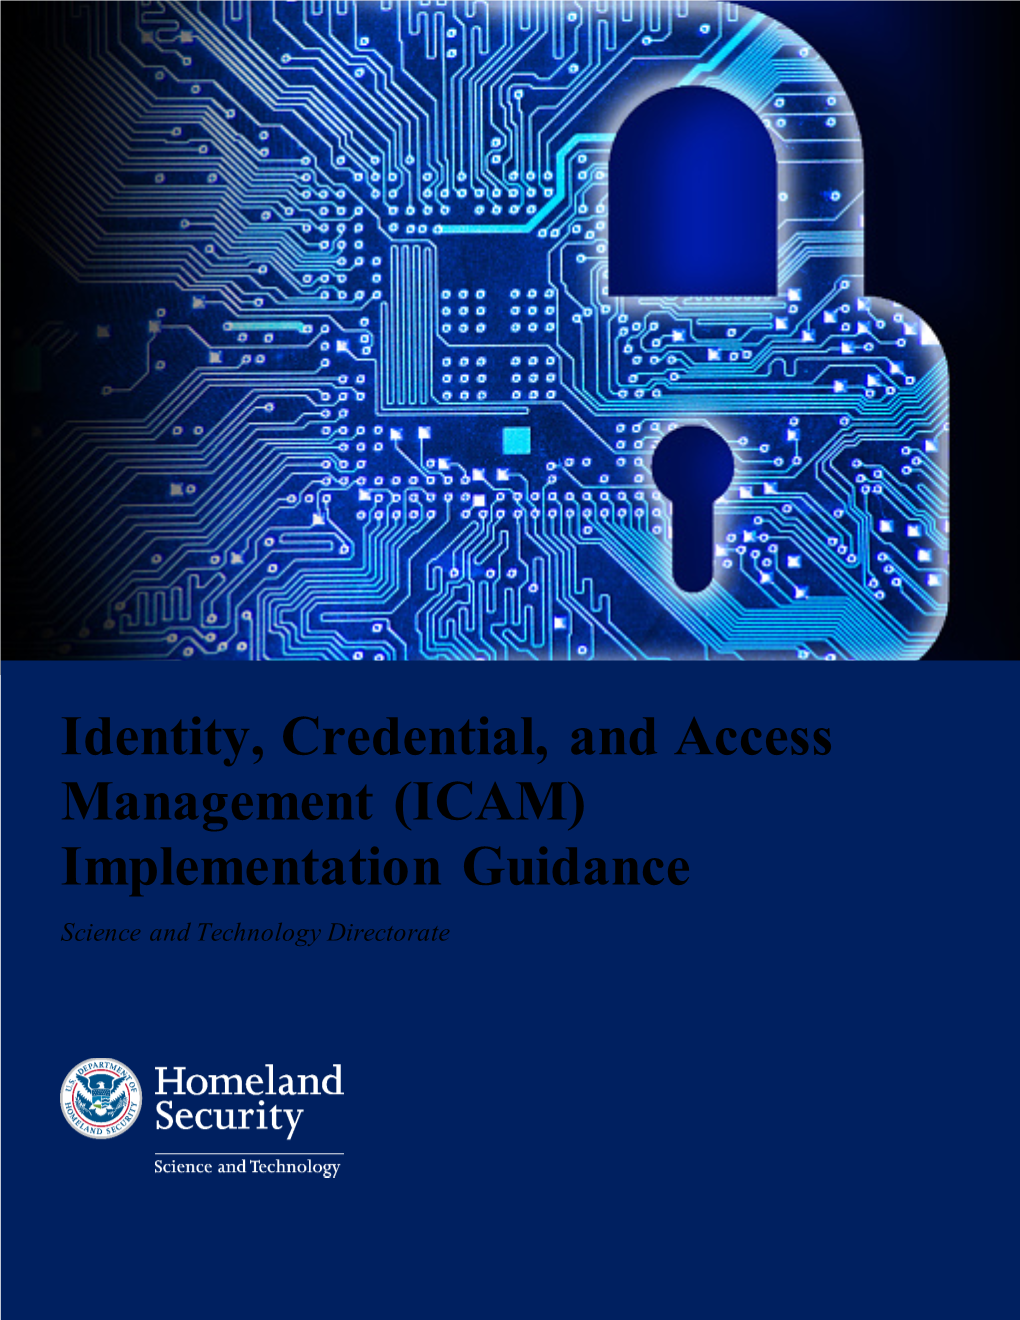 Identity, Credential, and Access Management (ICAM) Implementation Guidance Science and Technology Directorate